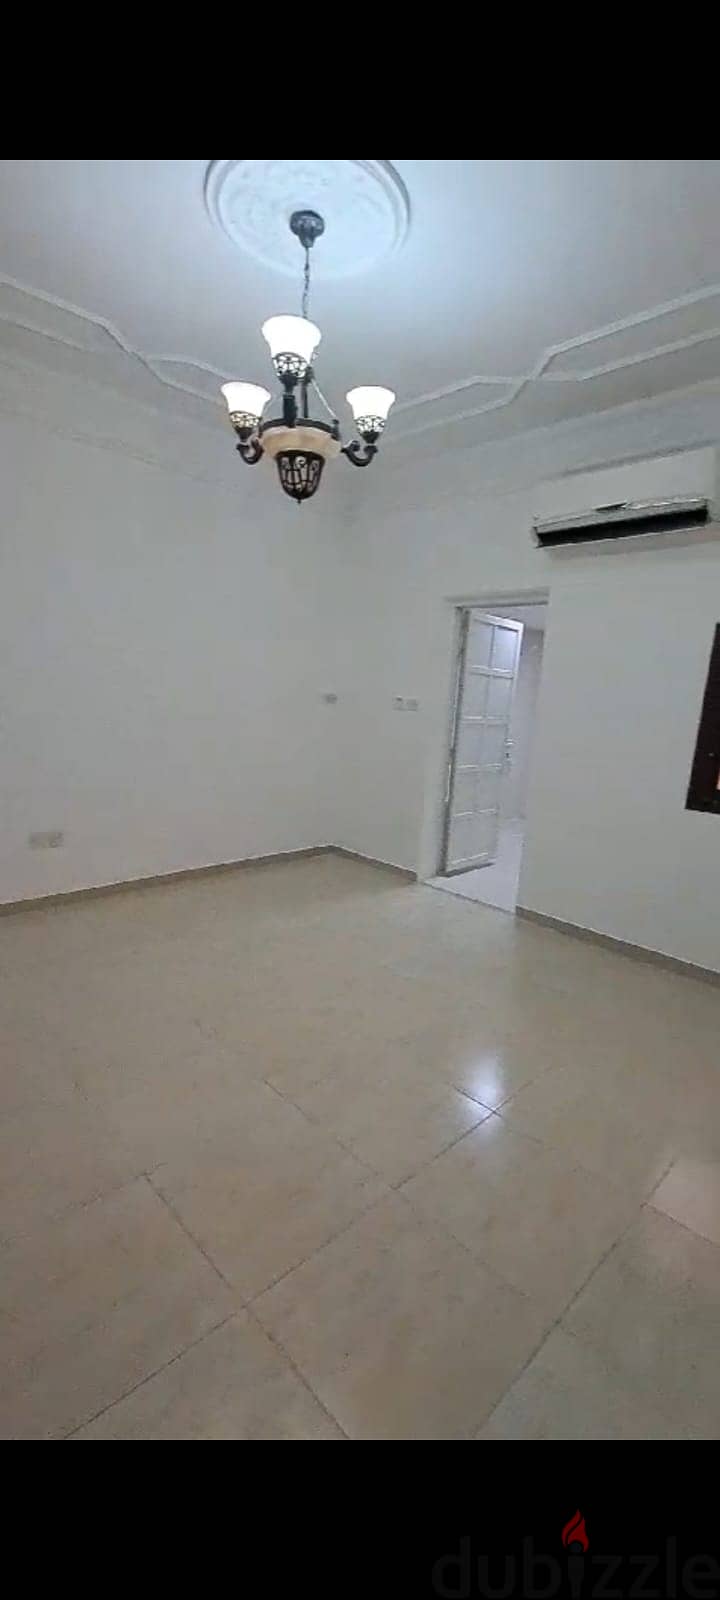 For rent flat (Ground floor apartment) in compound in Al Nasr 3bhk 16